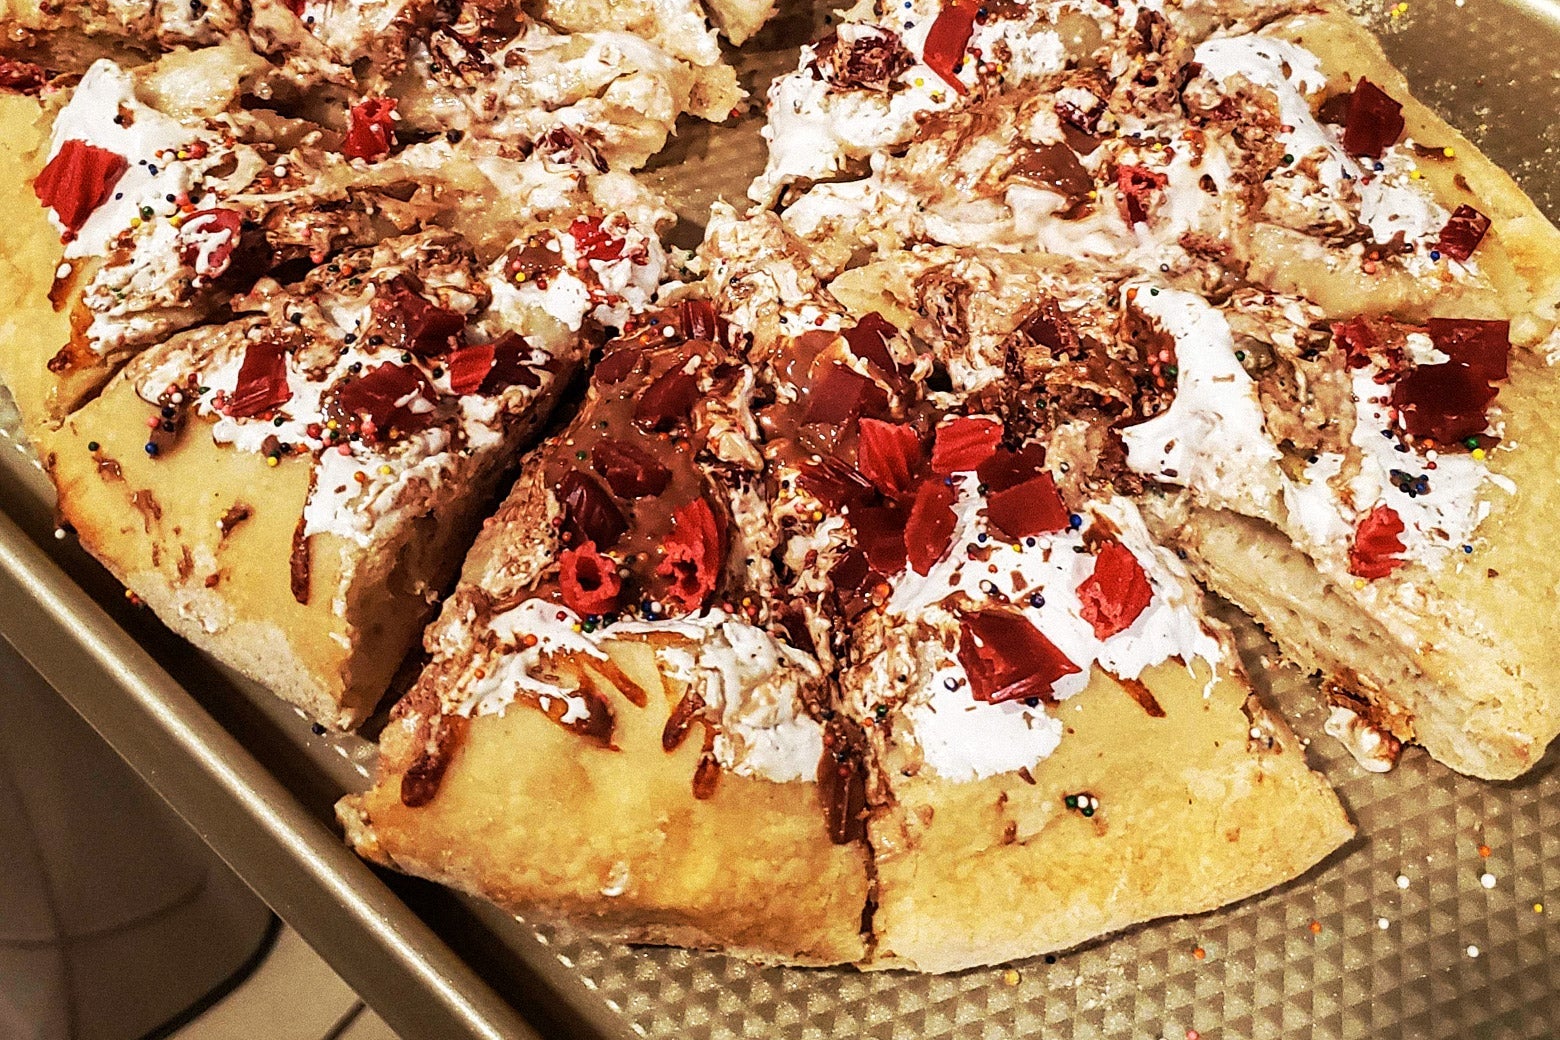 The dessert pizza after it was cut into slices.